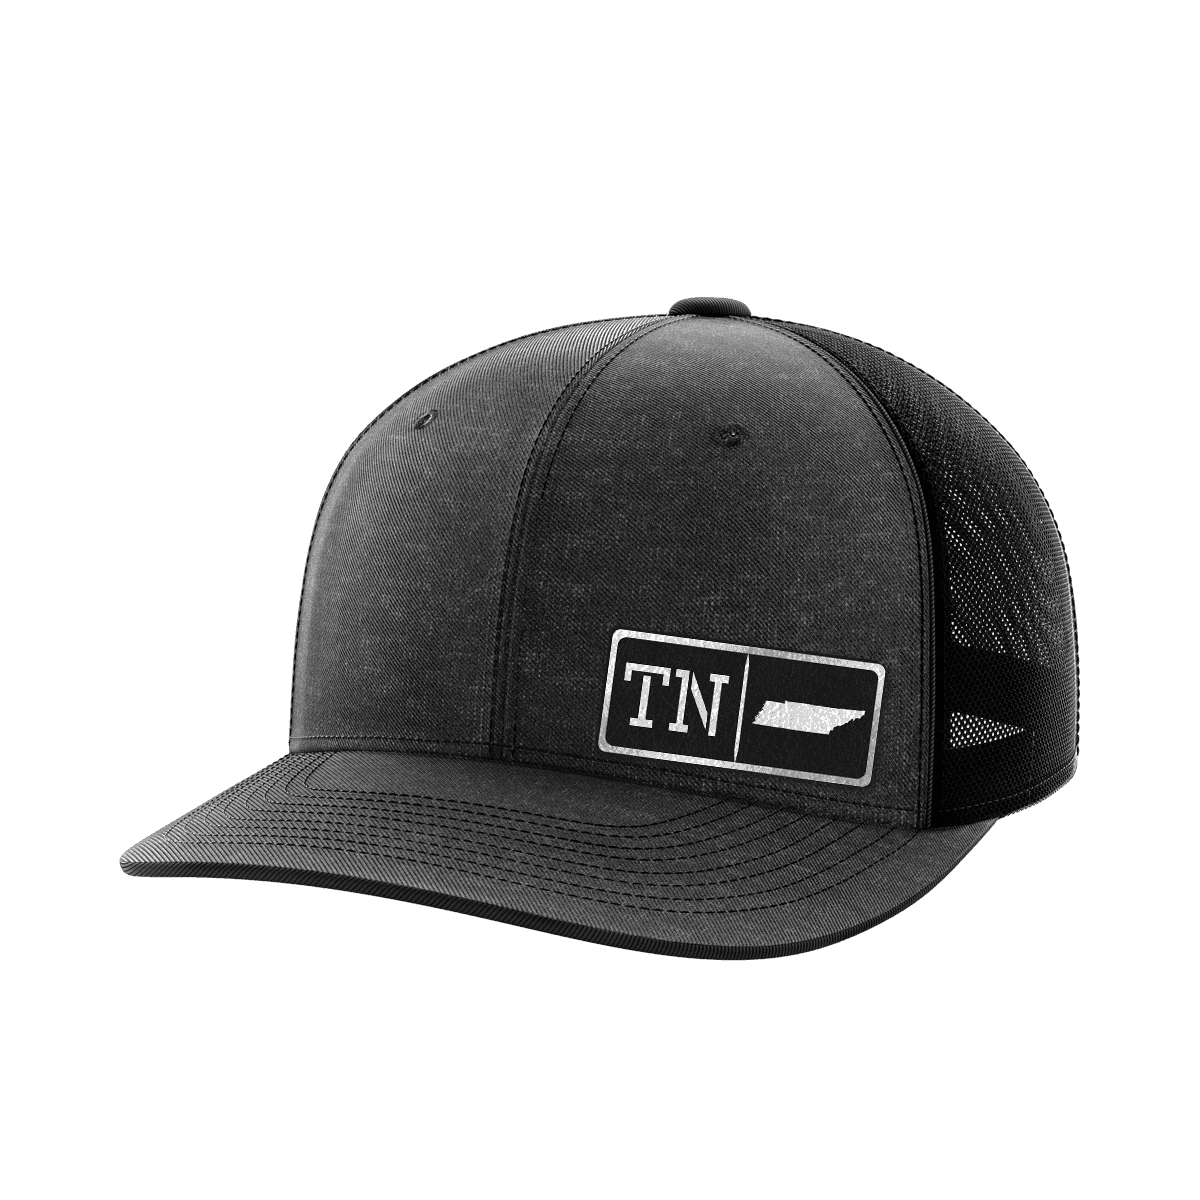 Thumbnail for Tennessee Homegrown Hats - Greater Half